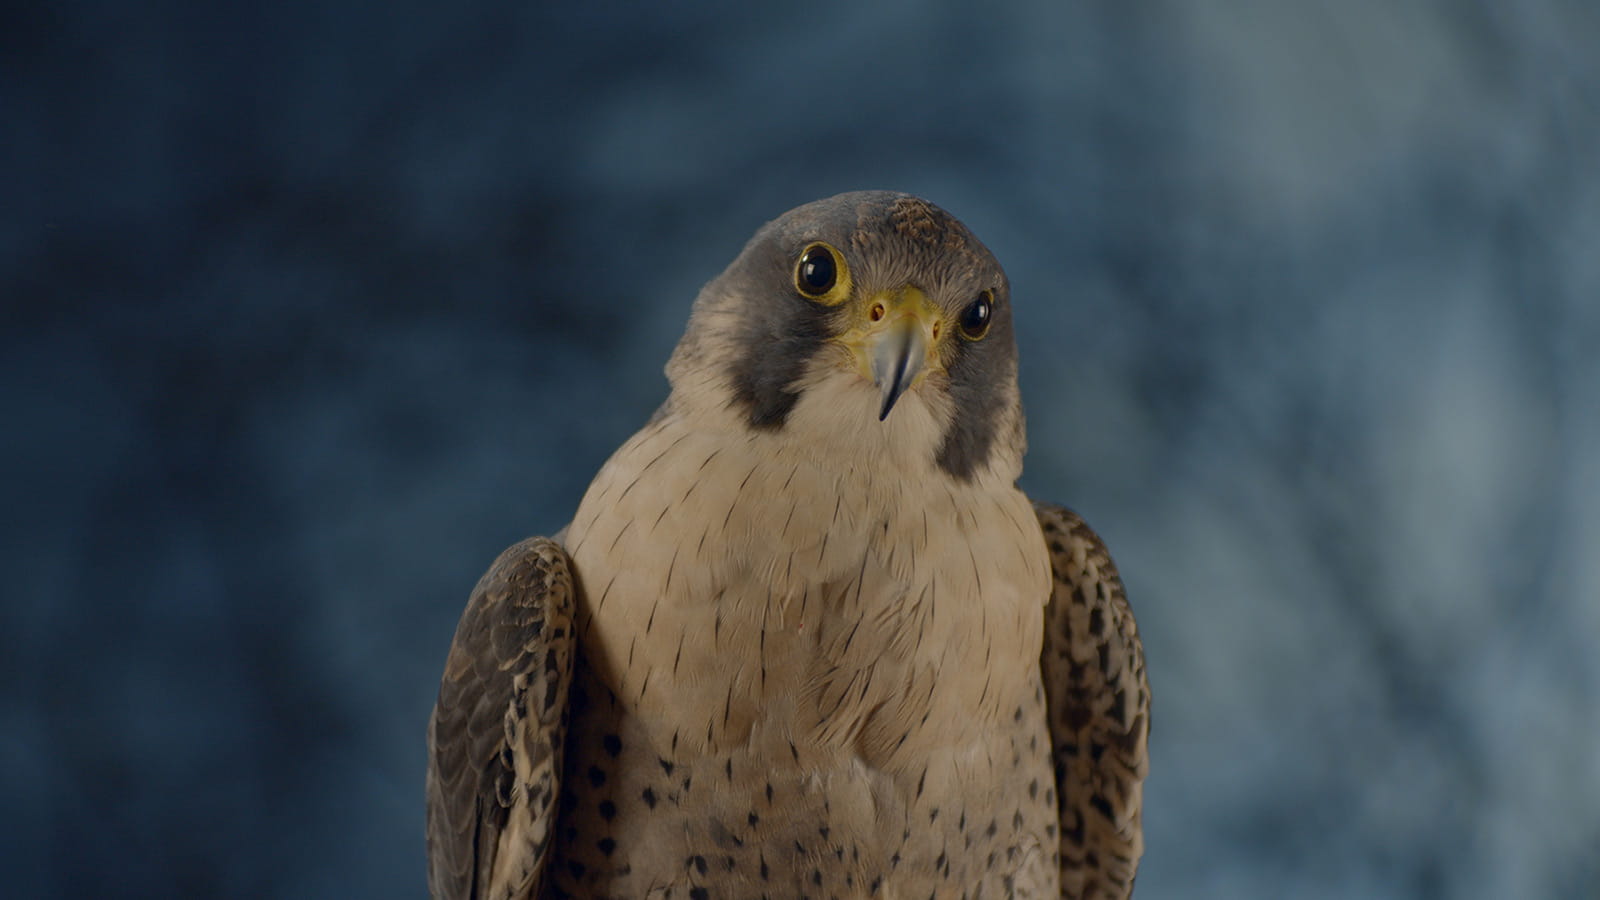 A peregrine falcon sits facing us against a soft-focus painted backdrop with faux-landscape scenery; the bird's head is at a tilt, while staring down the lens and looking directly at the viewer.